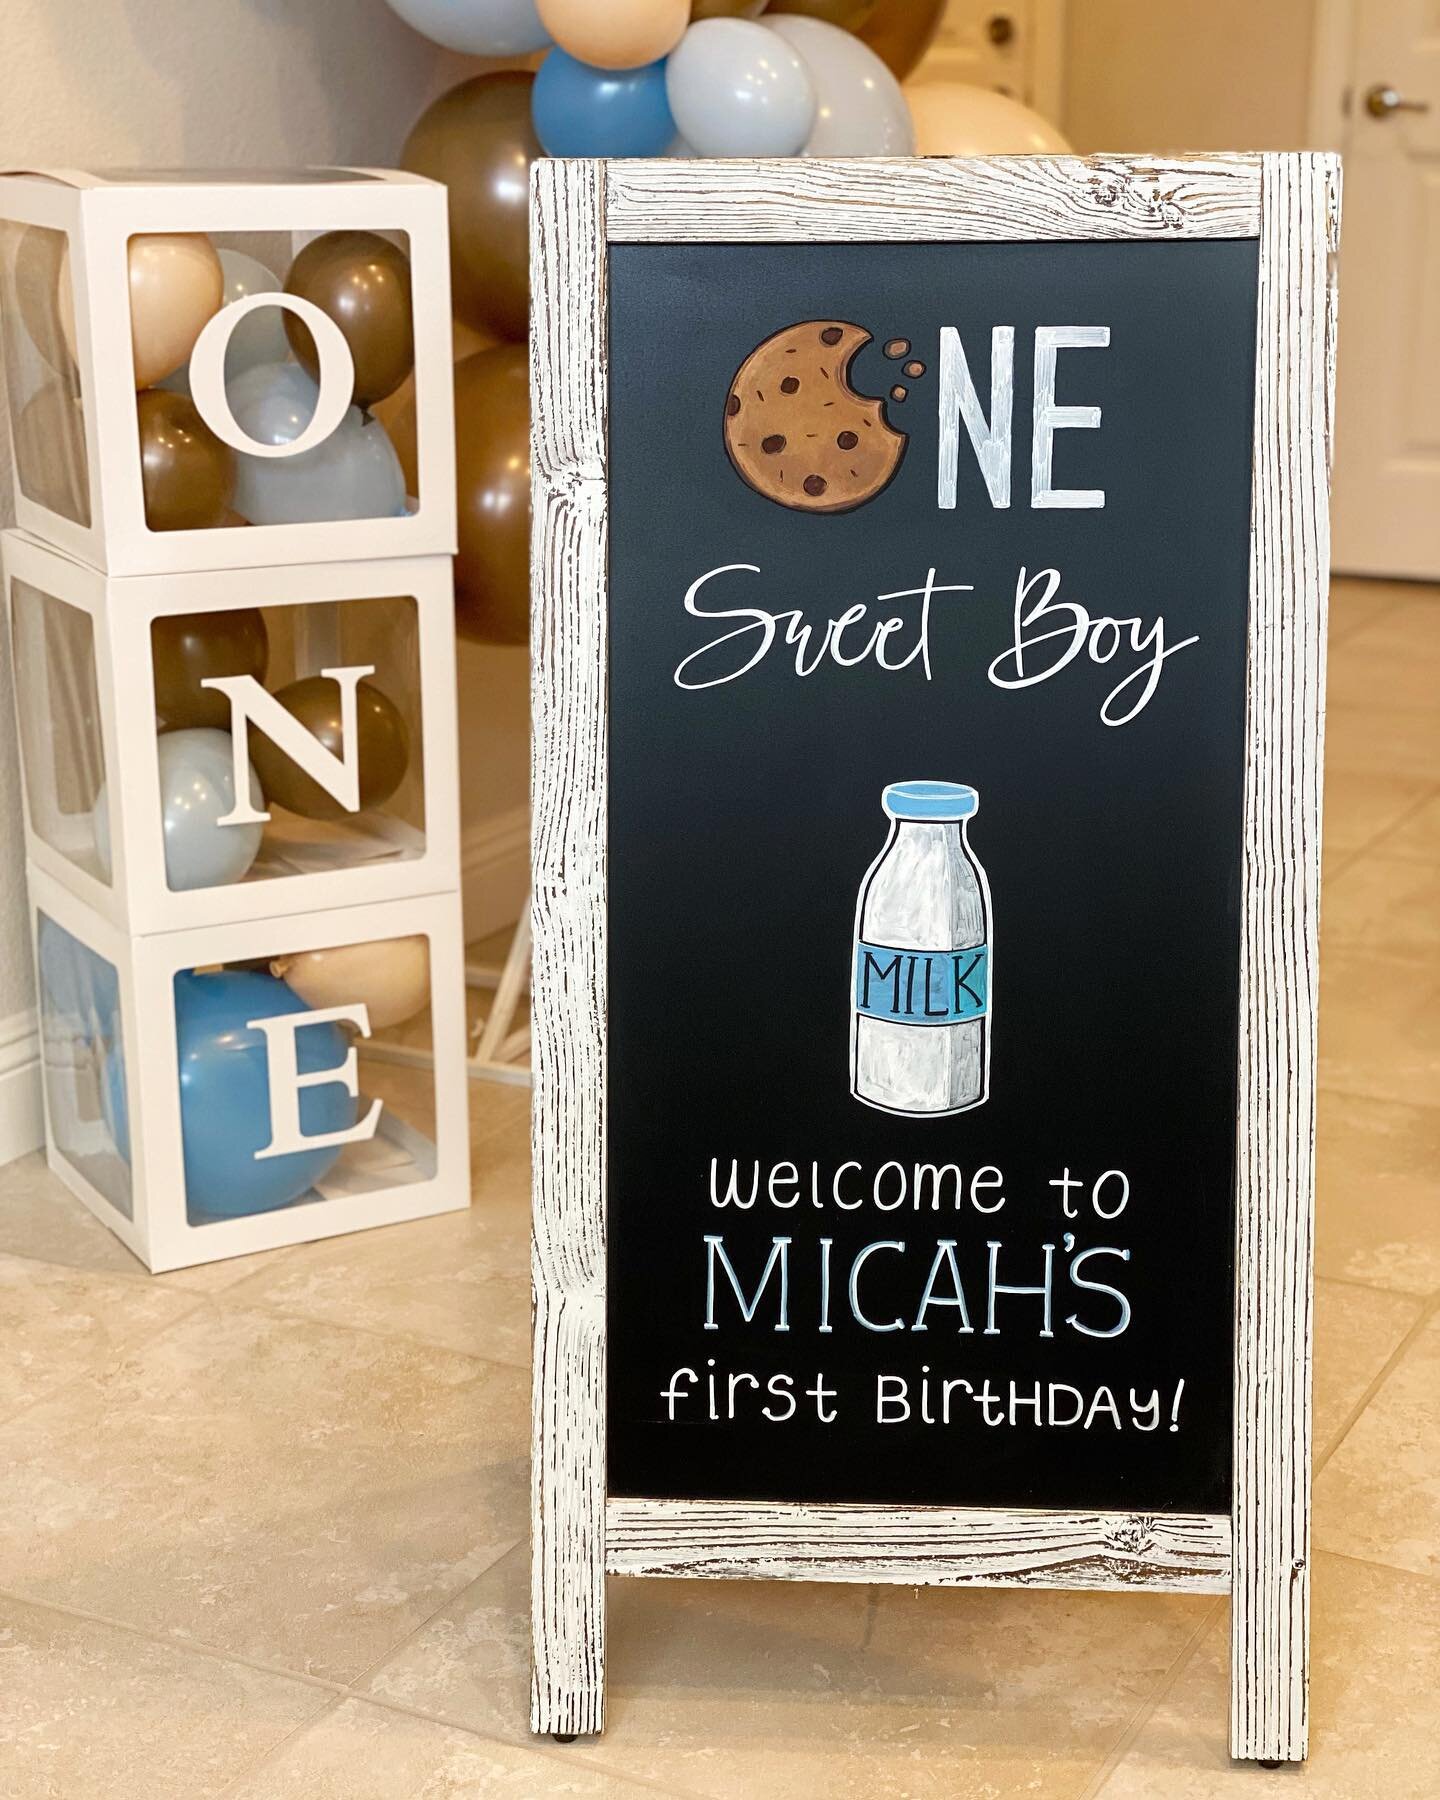 The sweetest birthday for the sweetest boy!  We love you, Micah! 
🍪The cookie was by far the most difficult part&hellip; making brown out of other chalk colors was interesting, but we got it! And the milk bottle, that&rsquo;s my favorite! 💙If you g